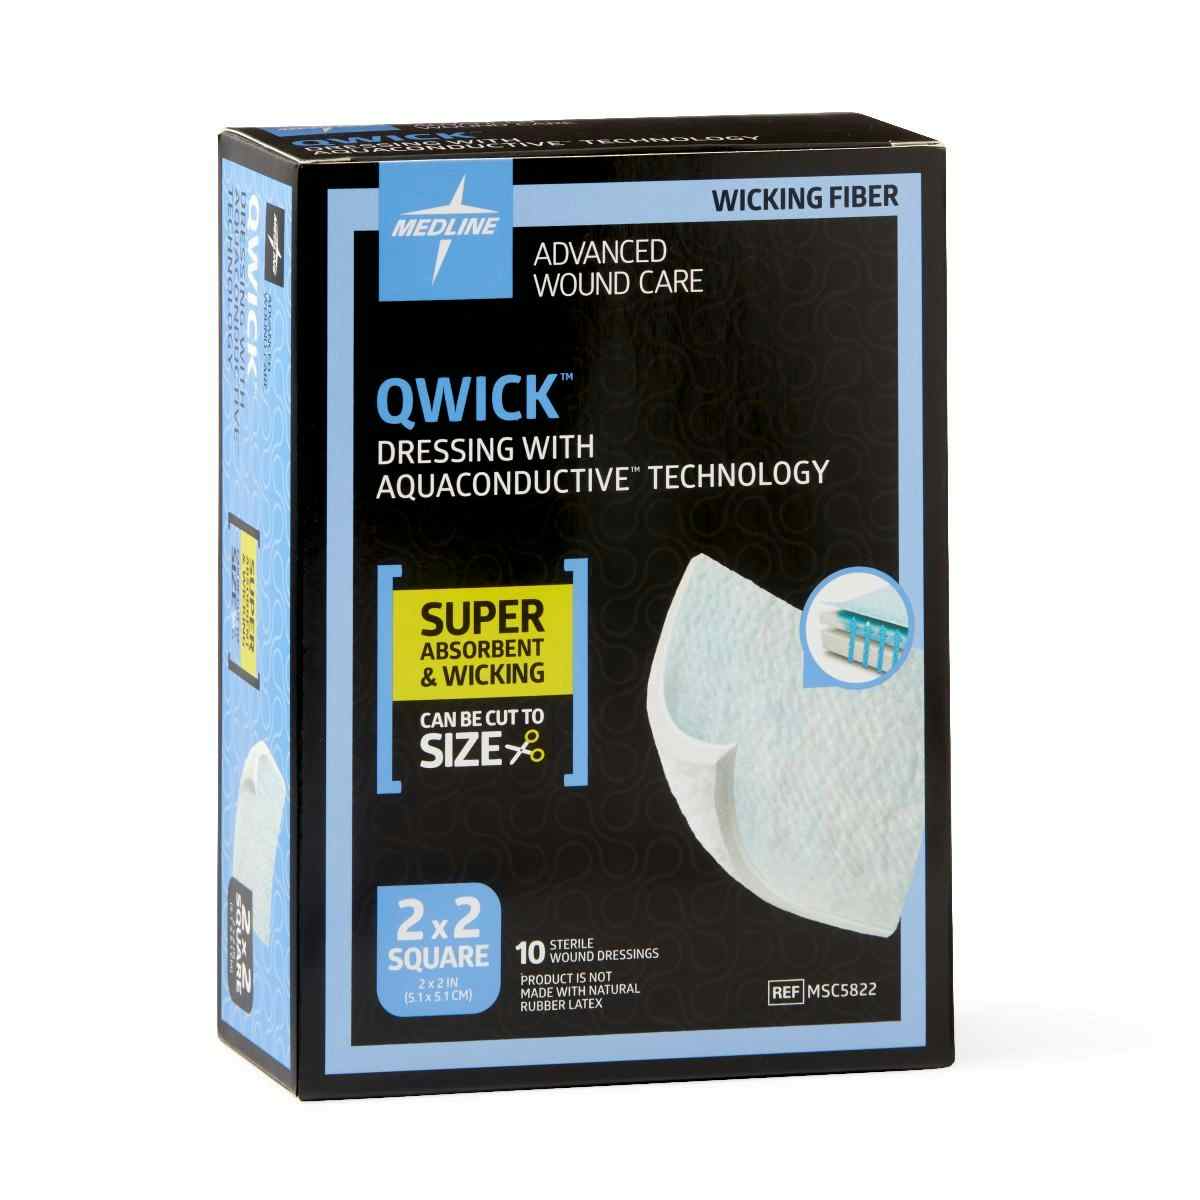 Medline Qwick Non-Adhesive Wound Dressing with Aquaconductive Technology